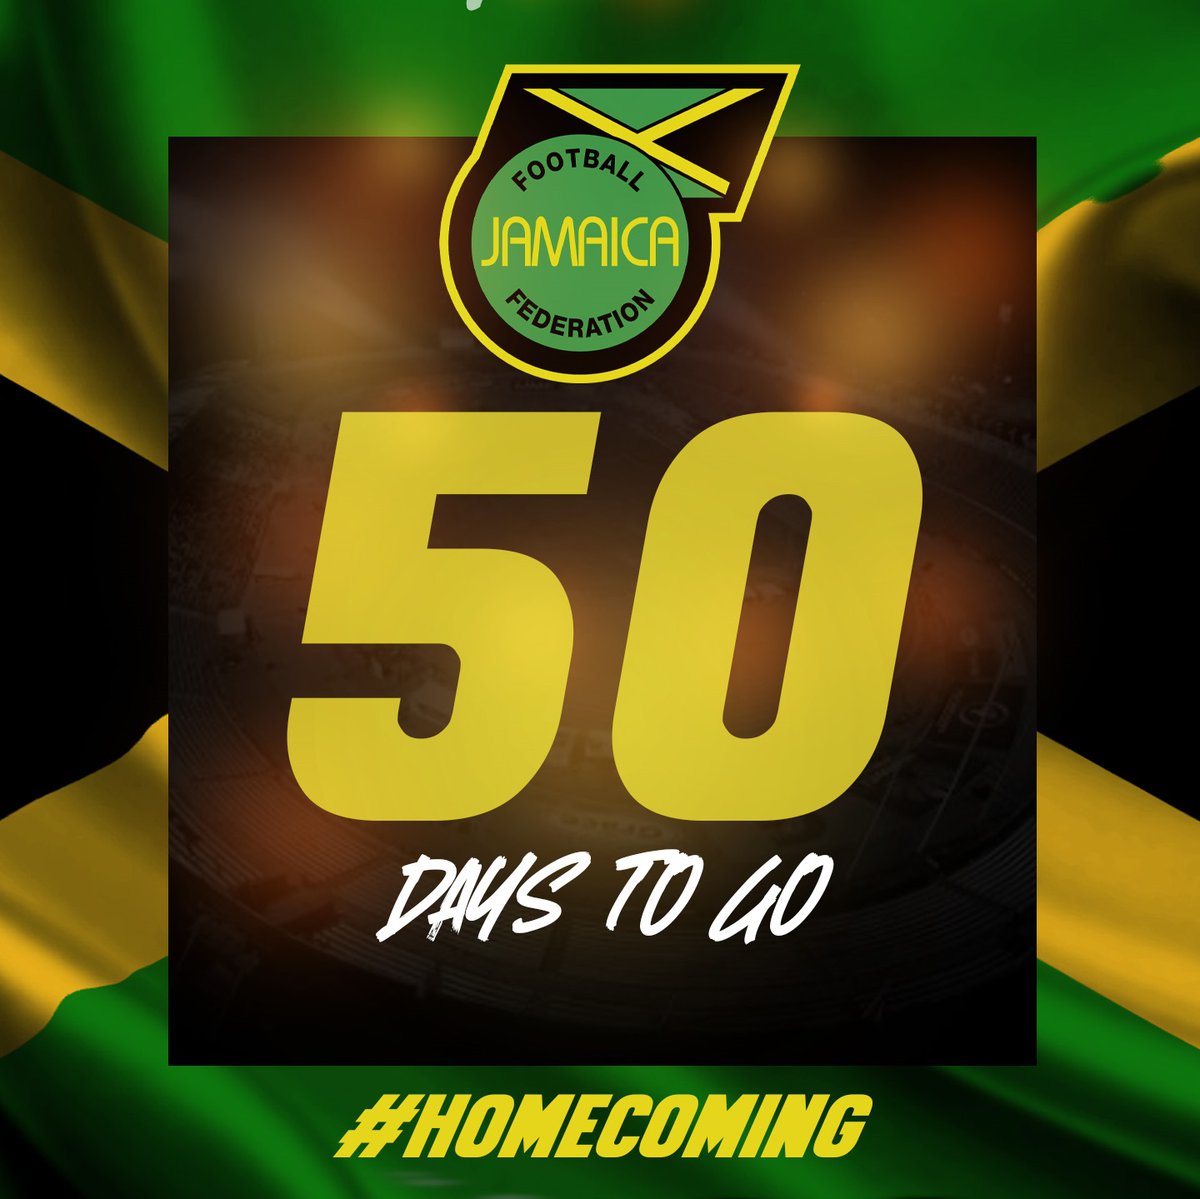 Today marks 50 days to go until our 1st World Cup Qualifier at home. We can't wait to see you 🇯🇲